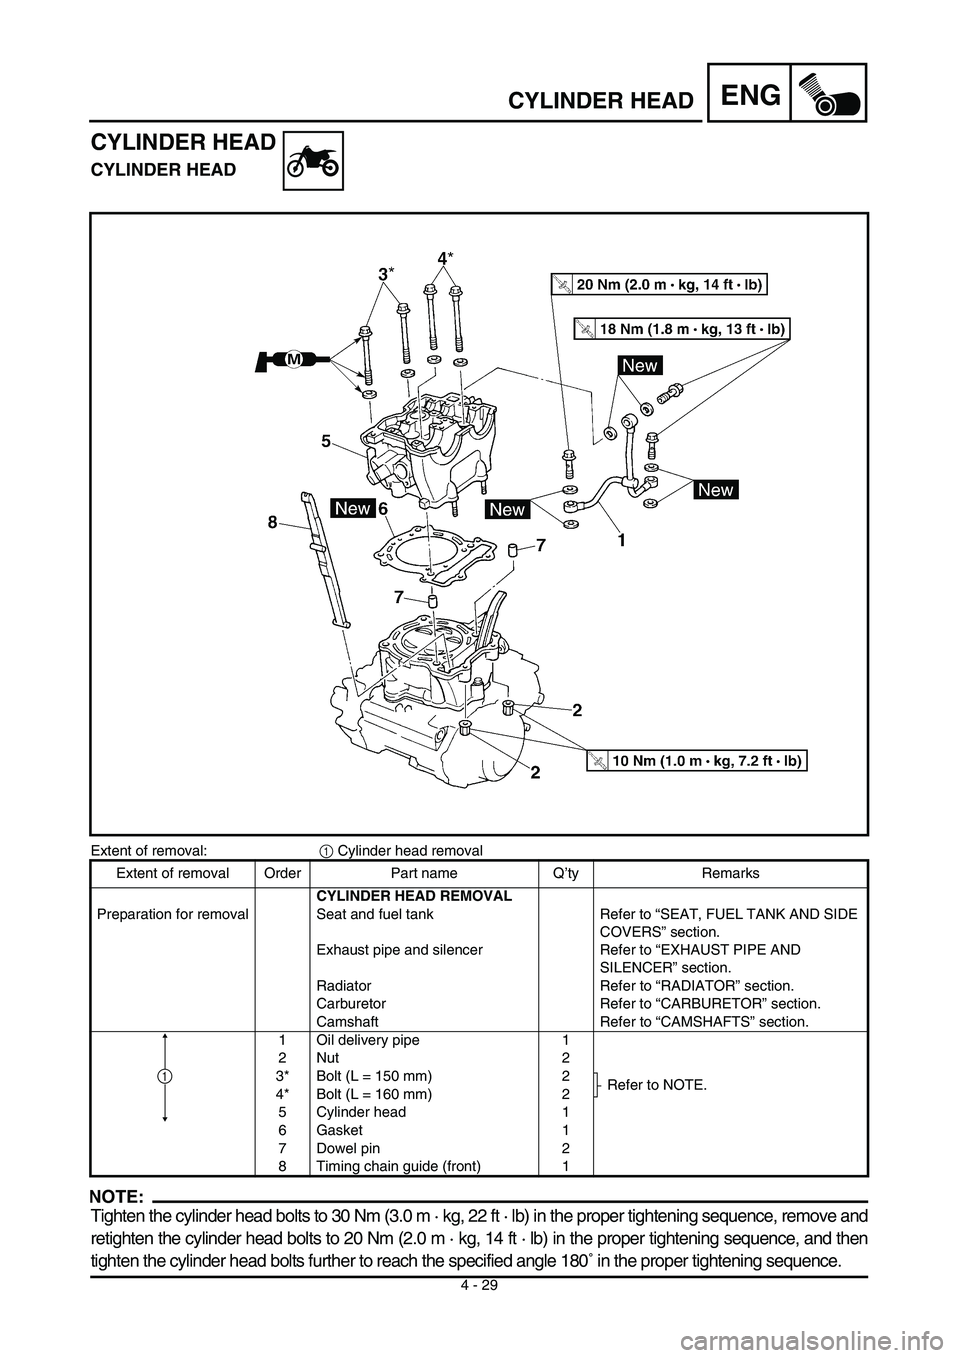 YAMAHA YZ450F 2003  Owners Manual 4 - 29
ENGCYLINDER HEAD
CYLINDER HEAD
CYLINDER HEAD
Extent of removal:1 Cylinder head removal
NOTE:
Tighten the cylinder head bolts to 30 Nm (3.0 m · kg, 22 ft · lb) in the proper tightening sequenc